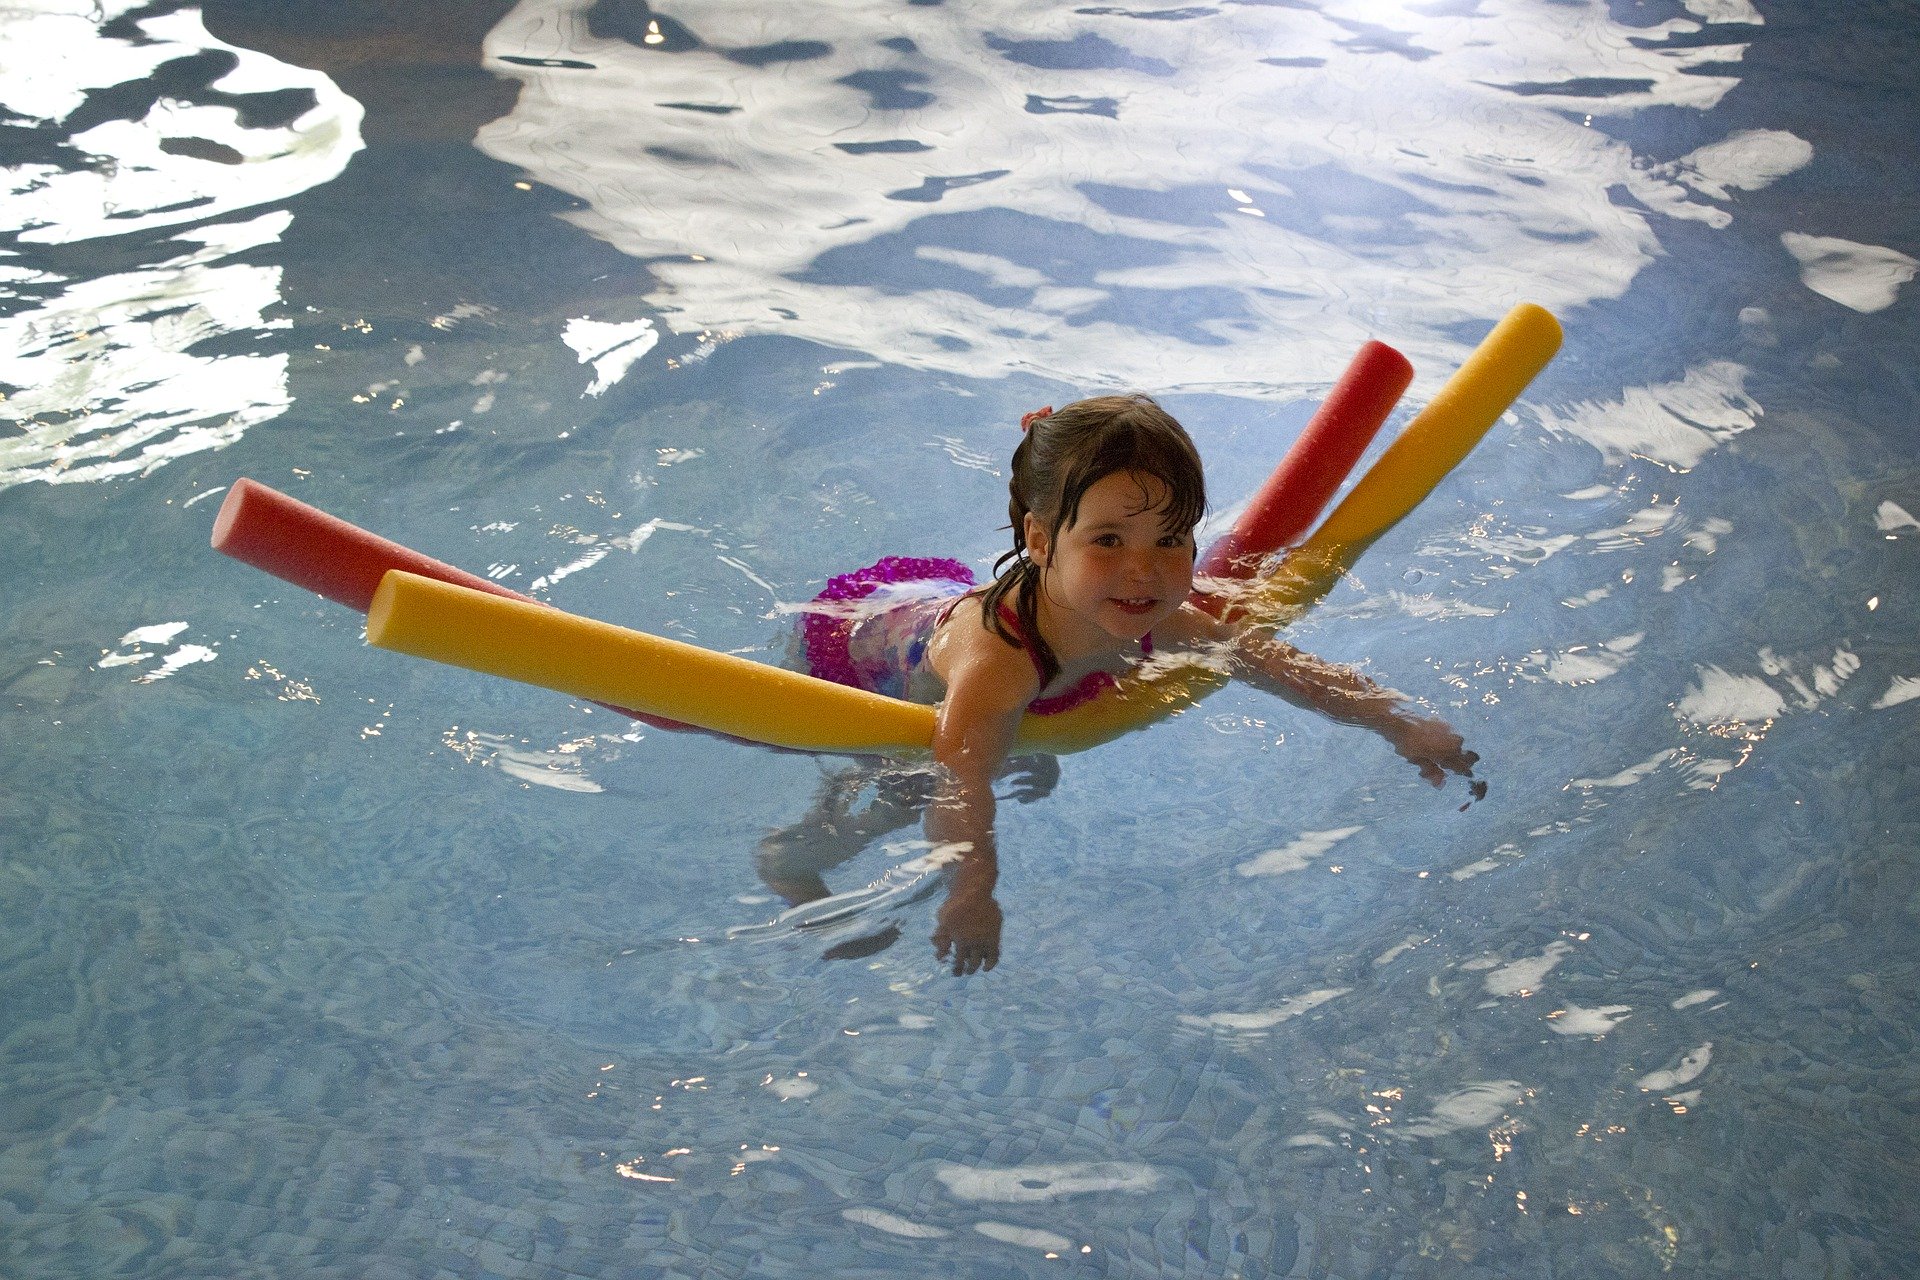 4 Unique Ways to Use A Pool Noodle's featured image